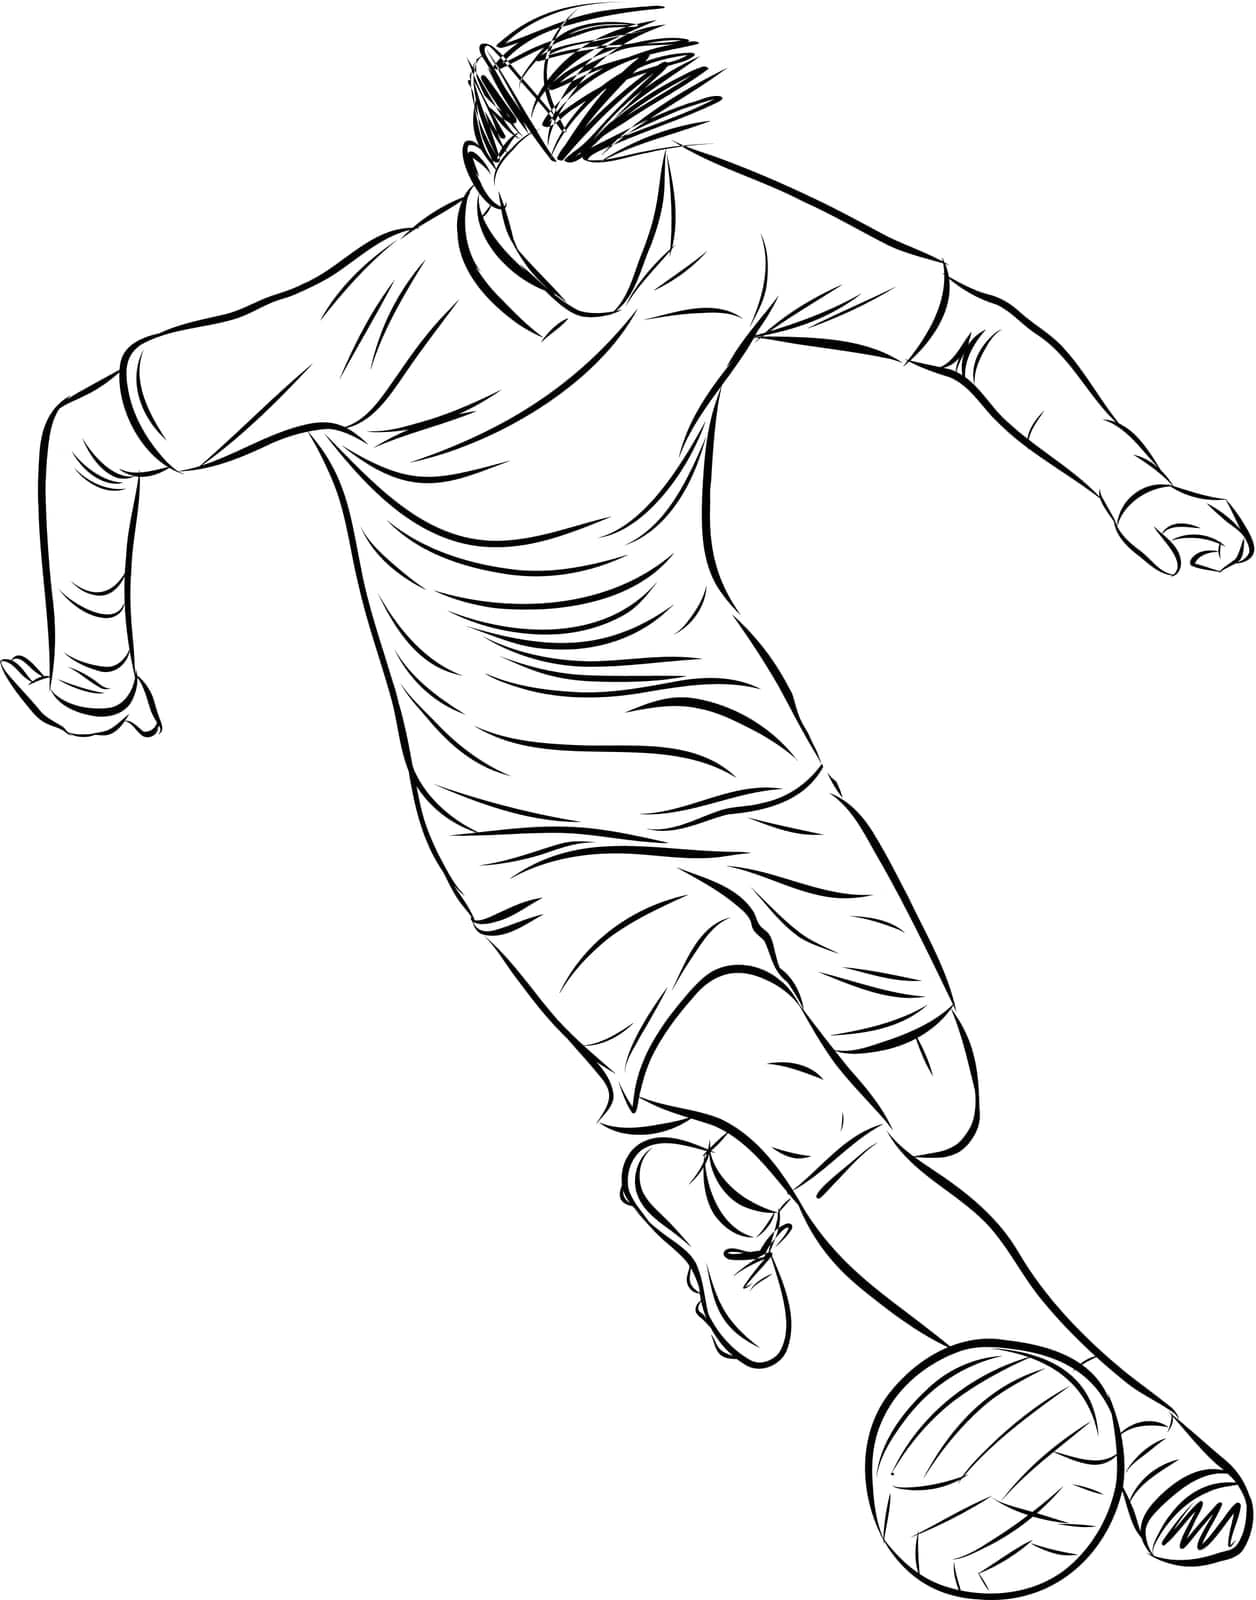 Running soccer, football player. Concept of sport, competition, goals. Sketch Illustration